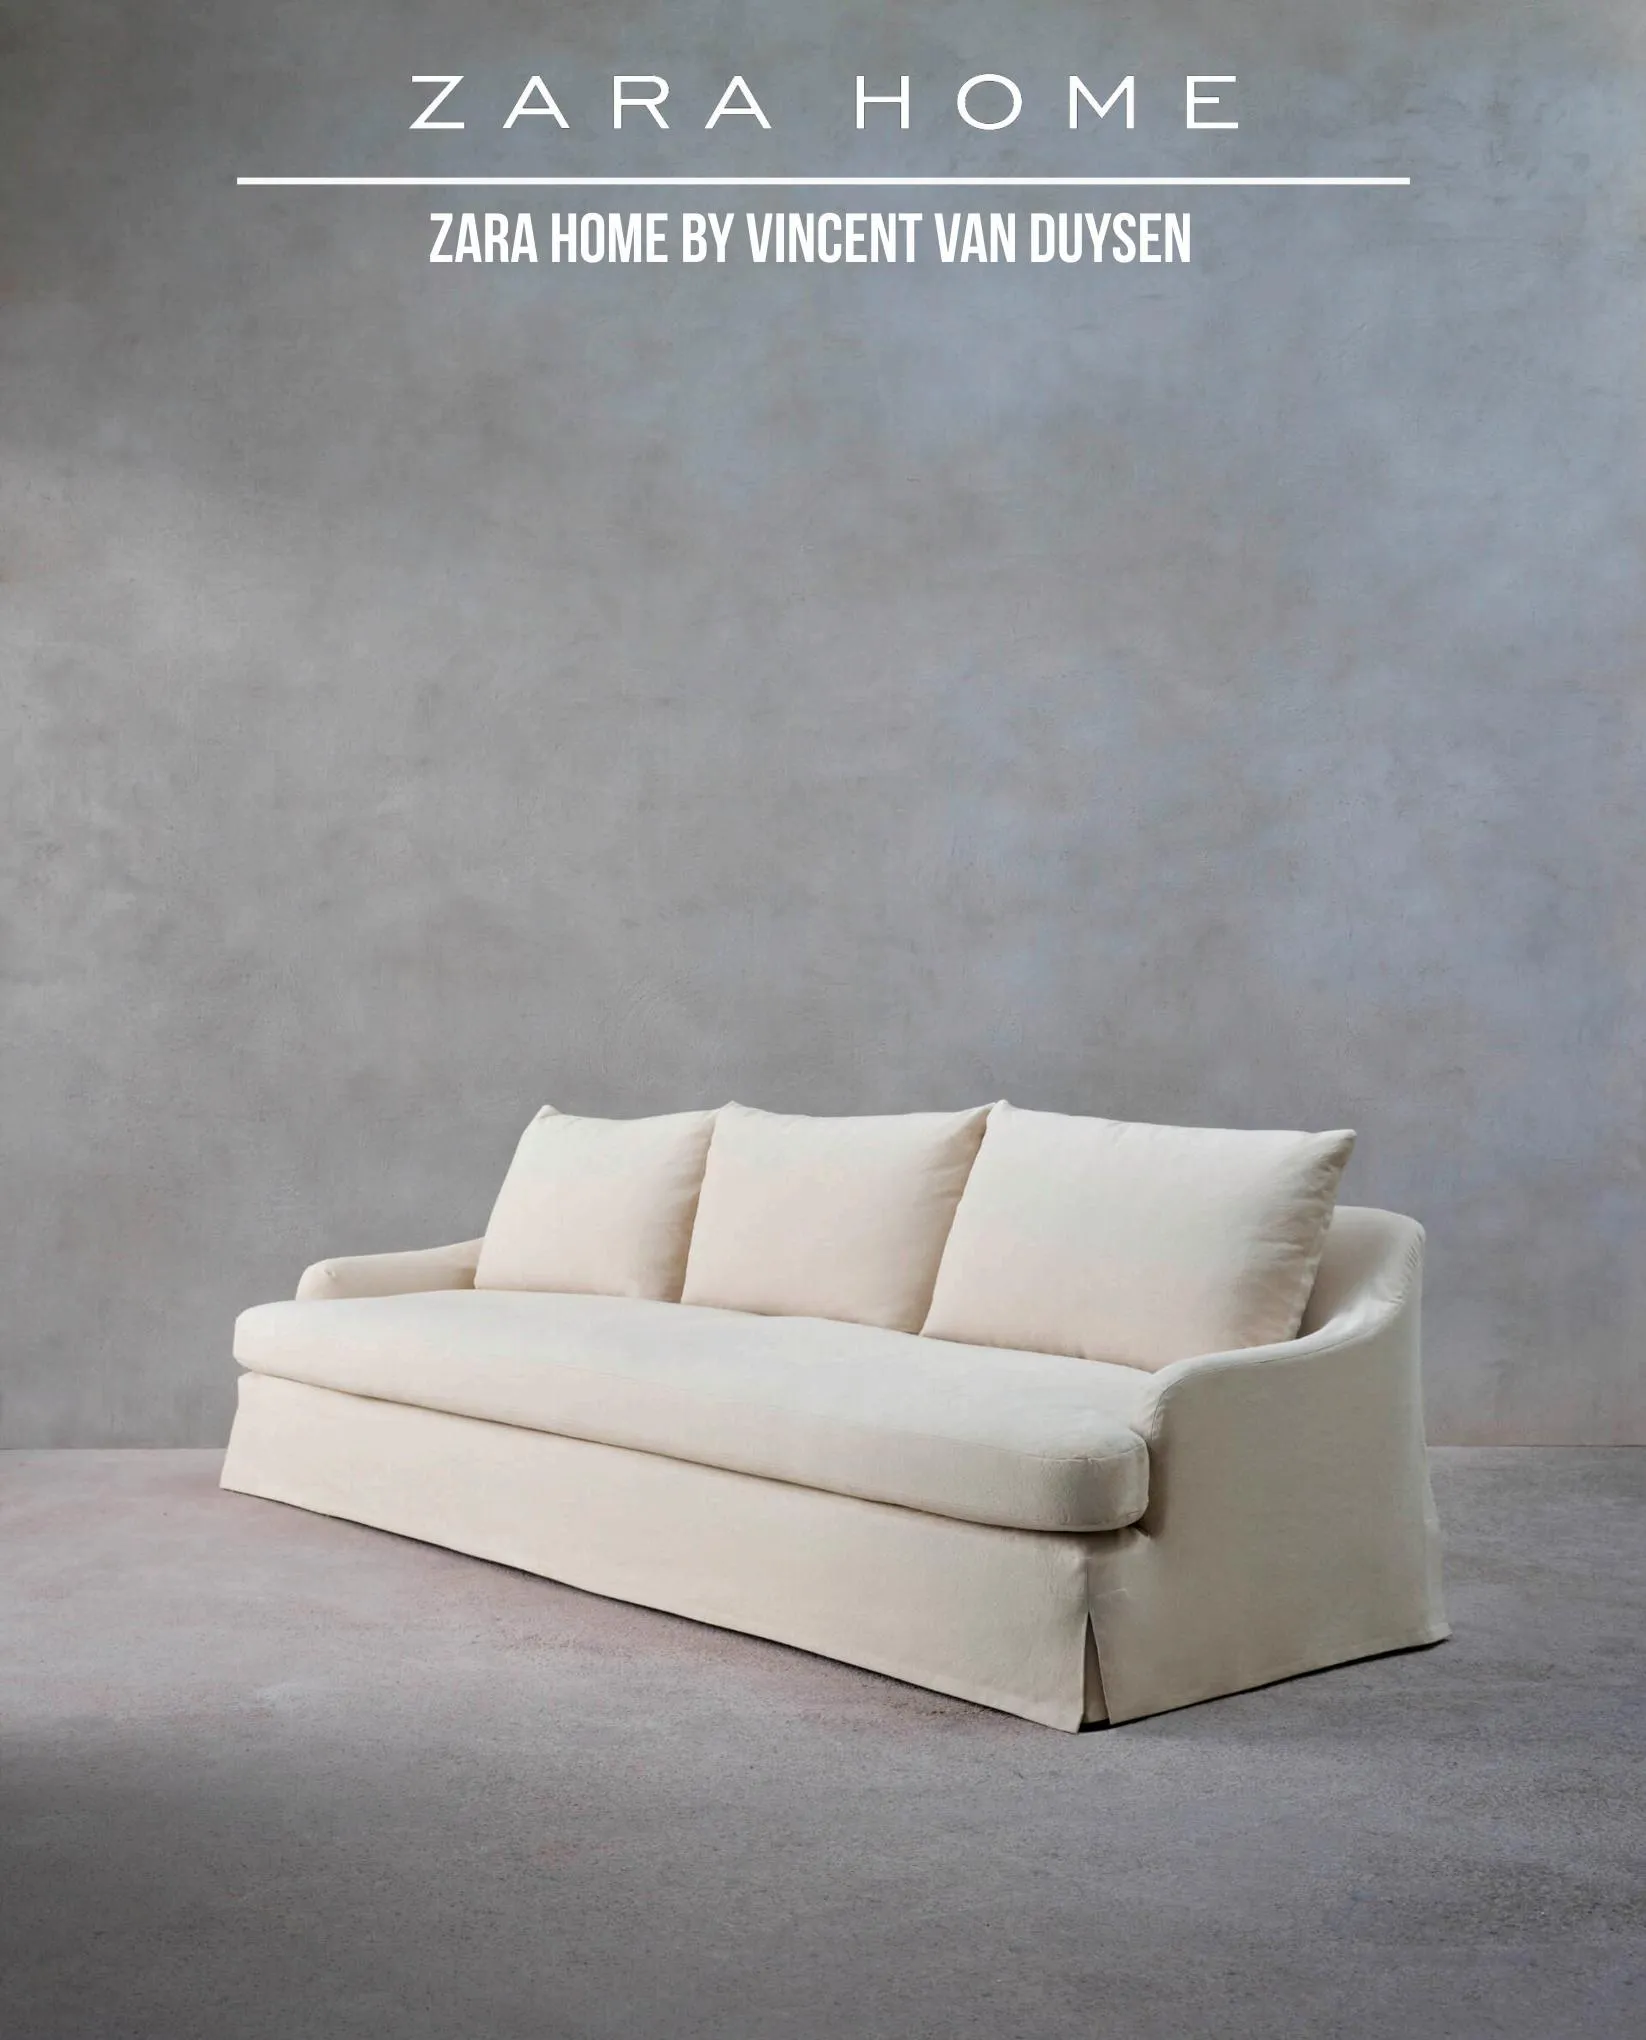 Catalogue Zara Home by Vincent Van Duysent, page 00001